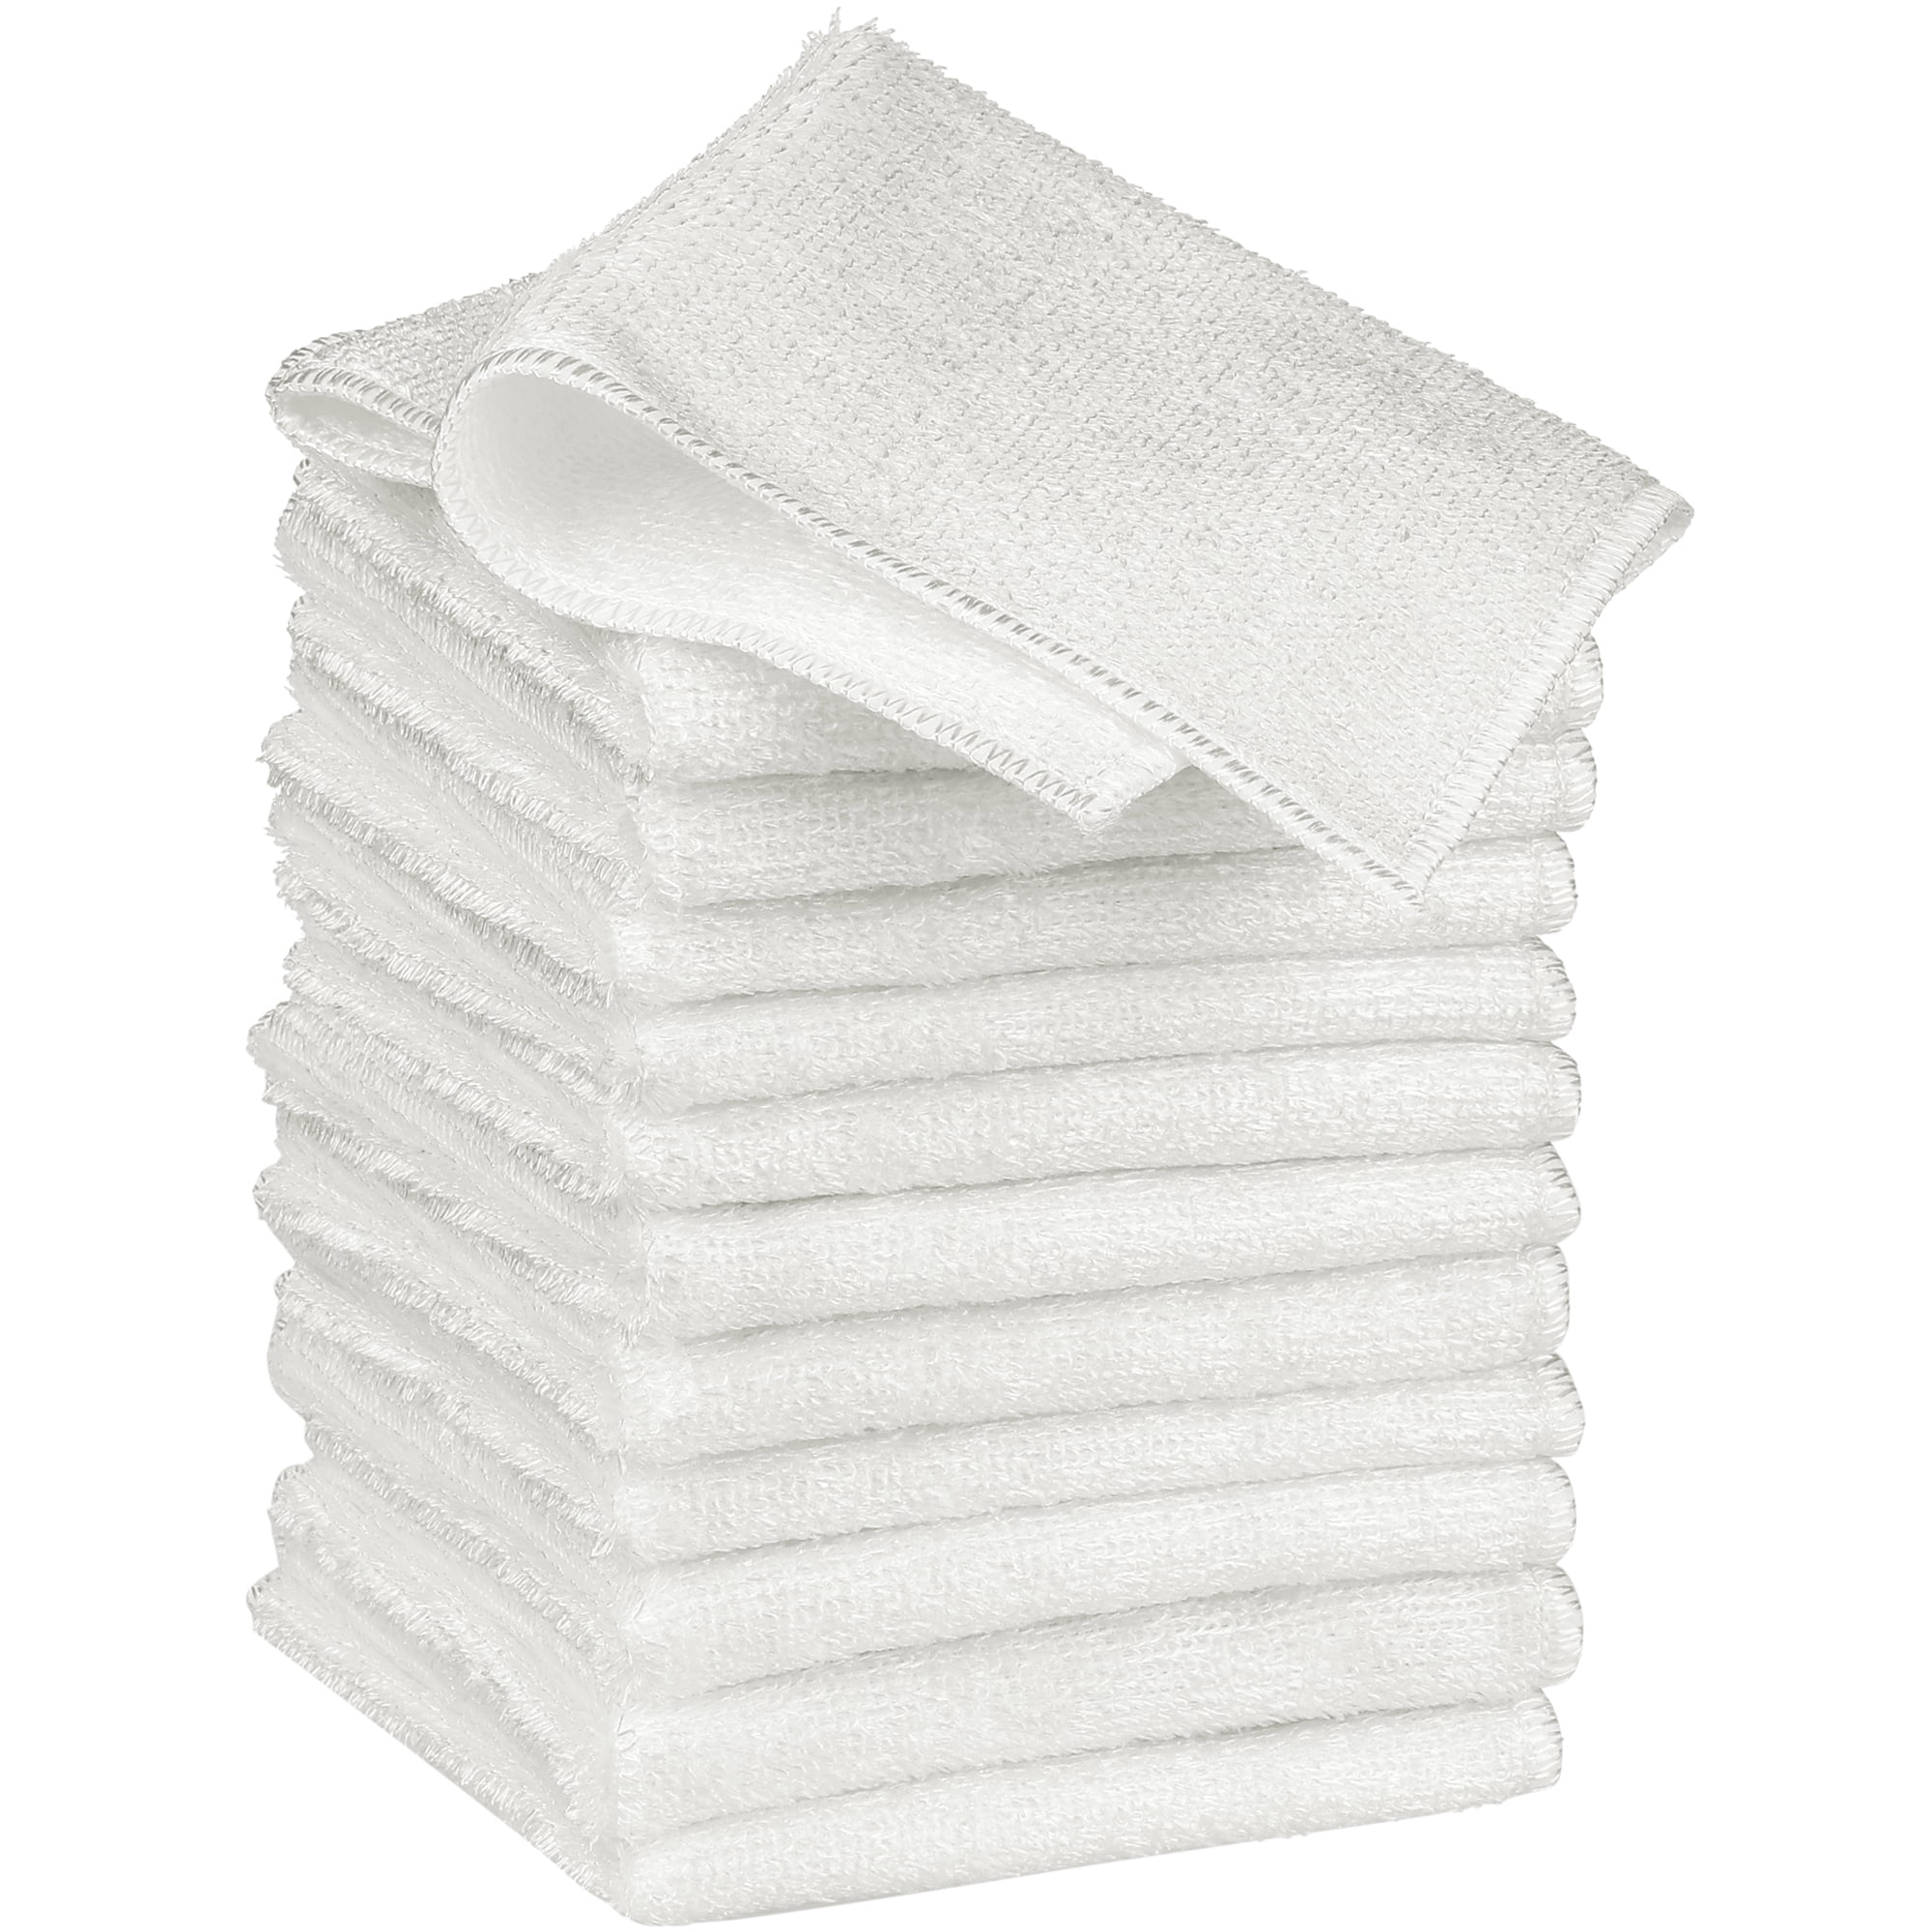 Uxcell 12 Pack Kitchen Dish Cloths Soft Absorbent Dish Towels White 10 x  12